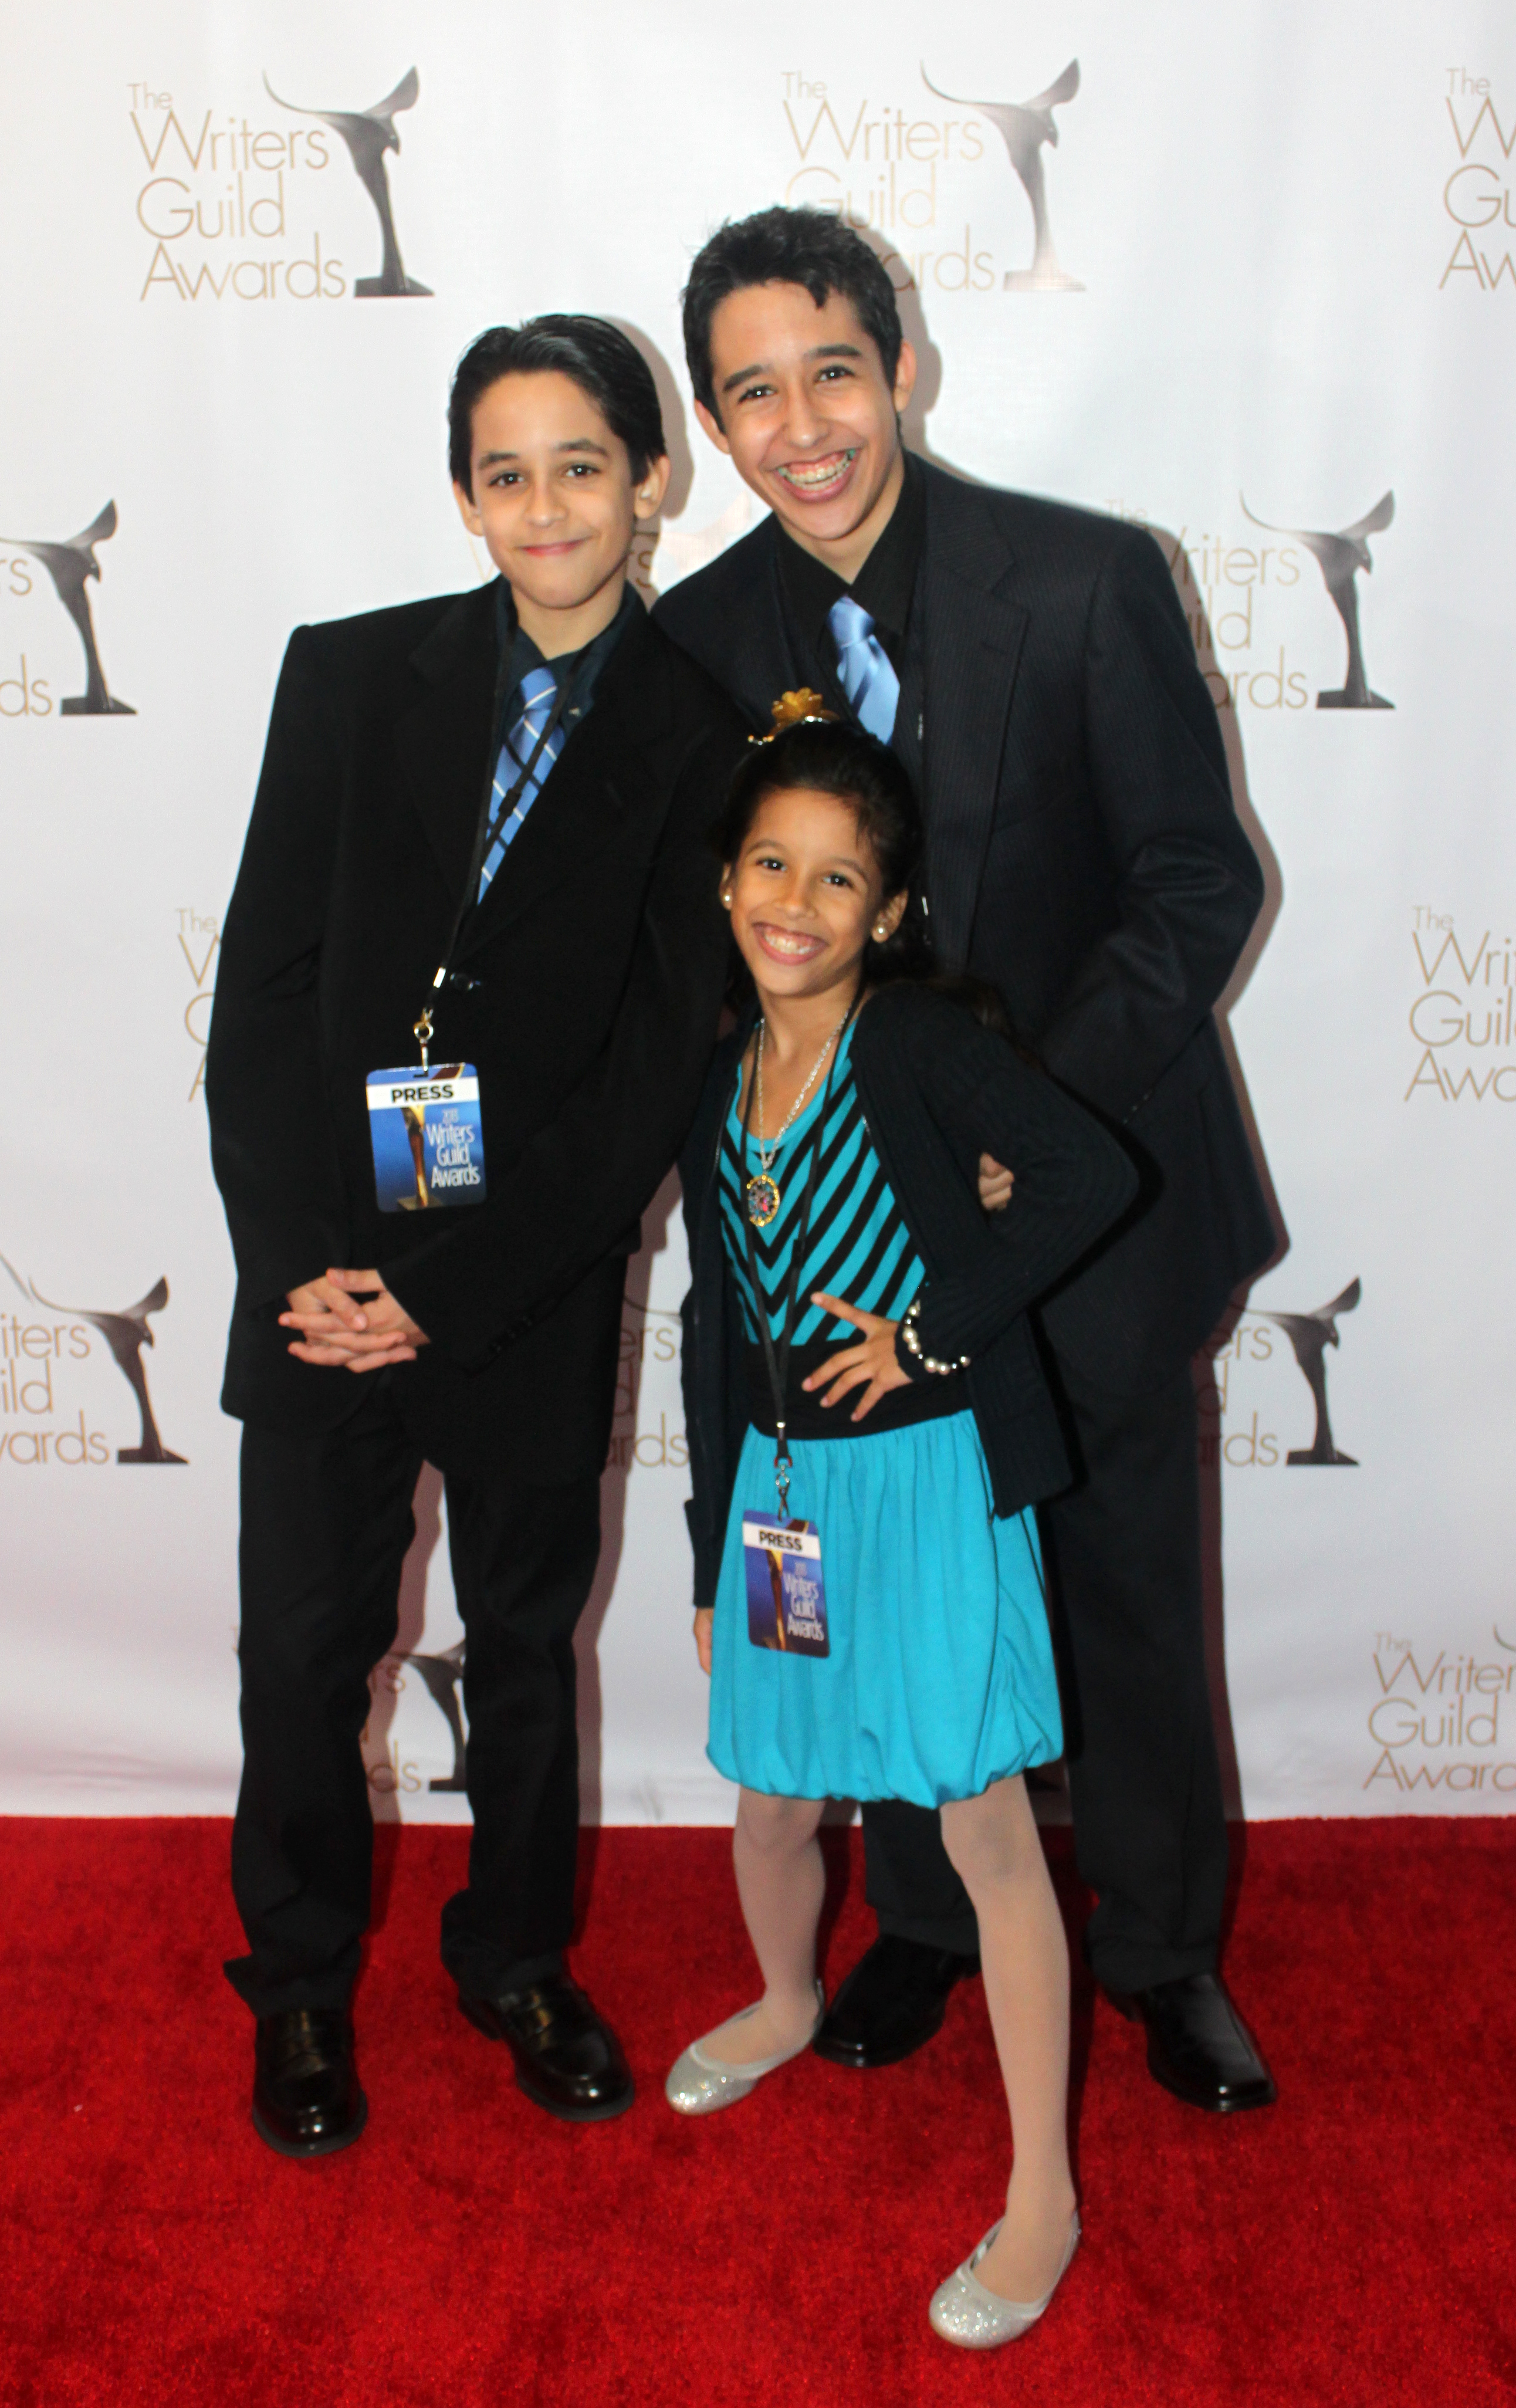 At the red carpet with Michael and Keira Pena. Writers Guild Awards.